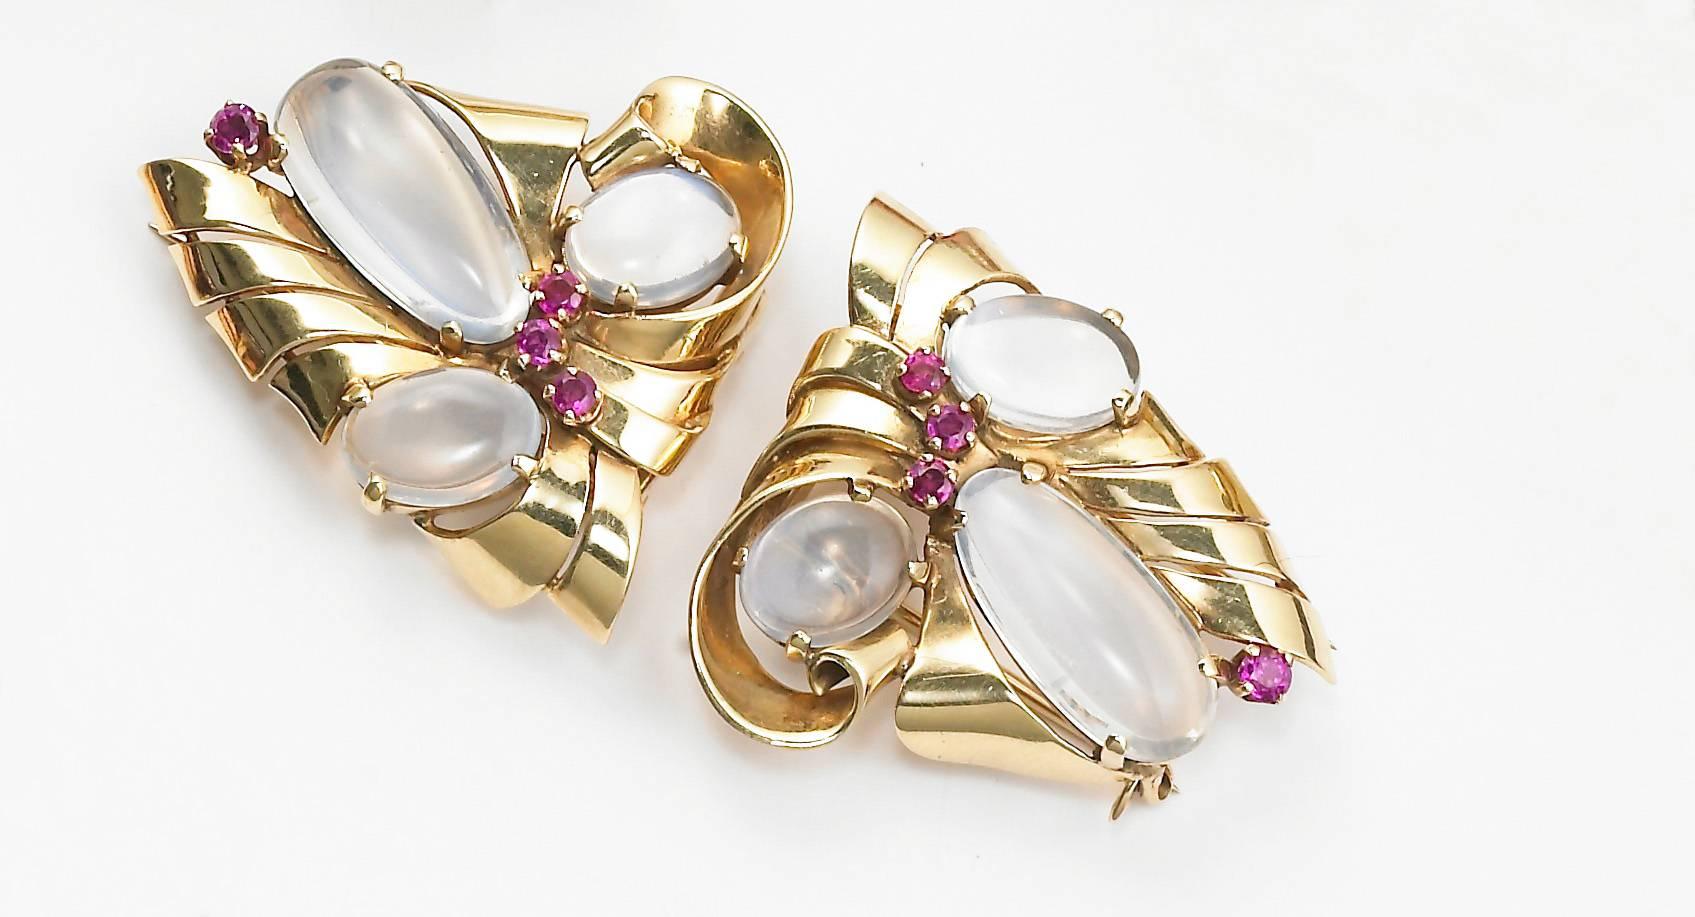 A beautiful pair of 14KT yellow gold clips with a scrolled design each set with three cabochon moonstones and accented with faceted round rubies. c1940s. Signed Raymond Yard.